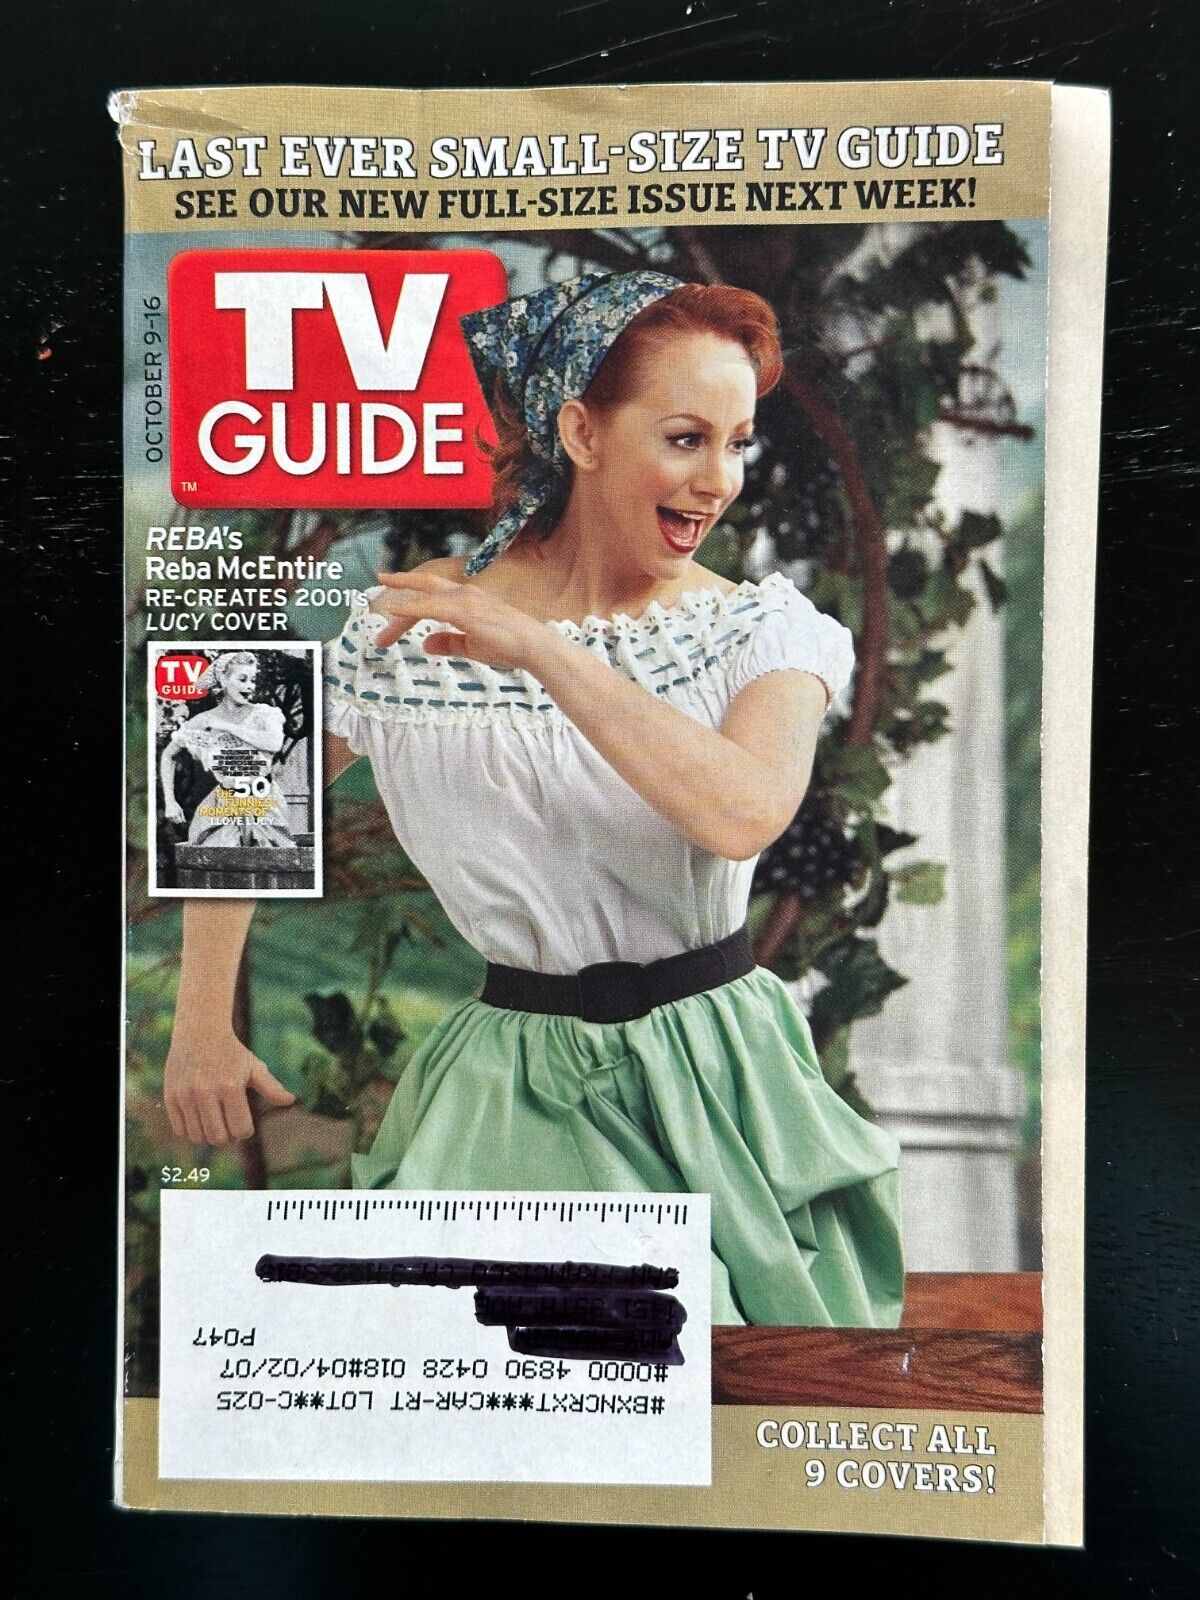 October 9, 2005 TV Guide Last Ever Small Size TV Guide - Reba McEntire as Lucy 